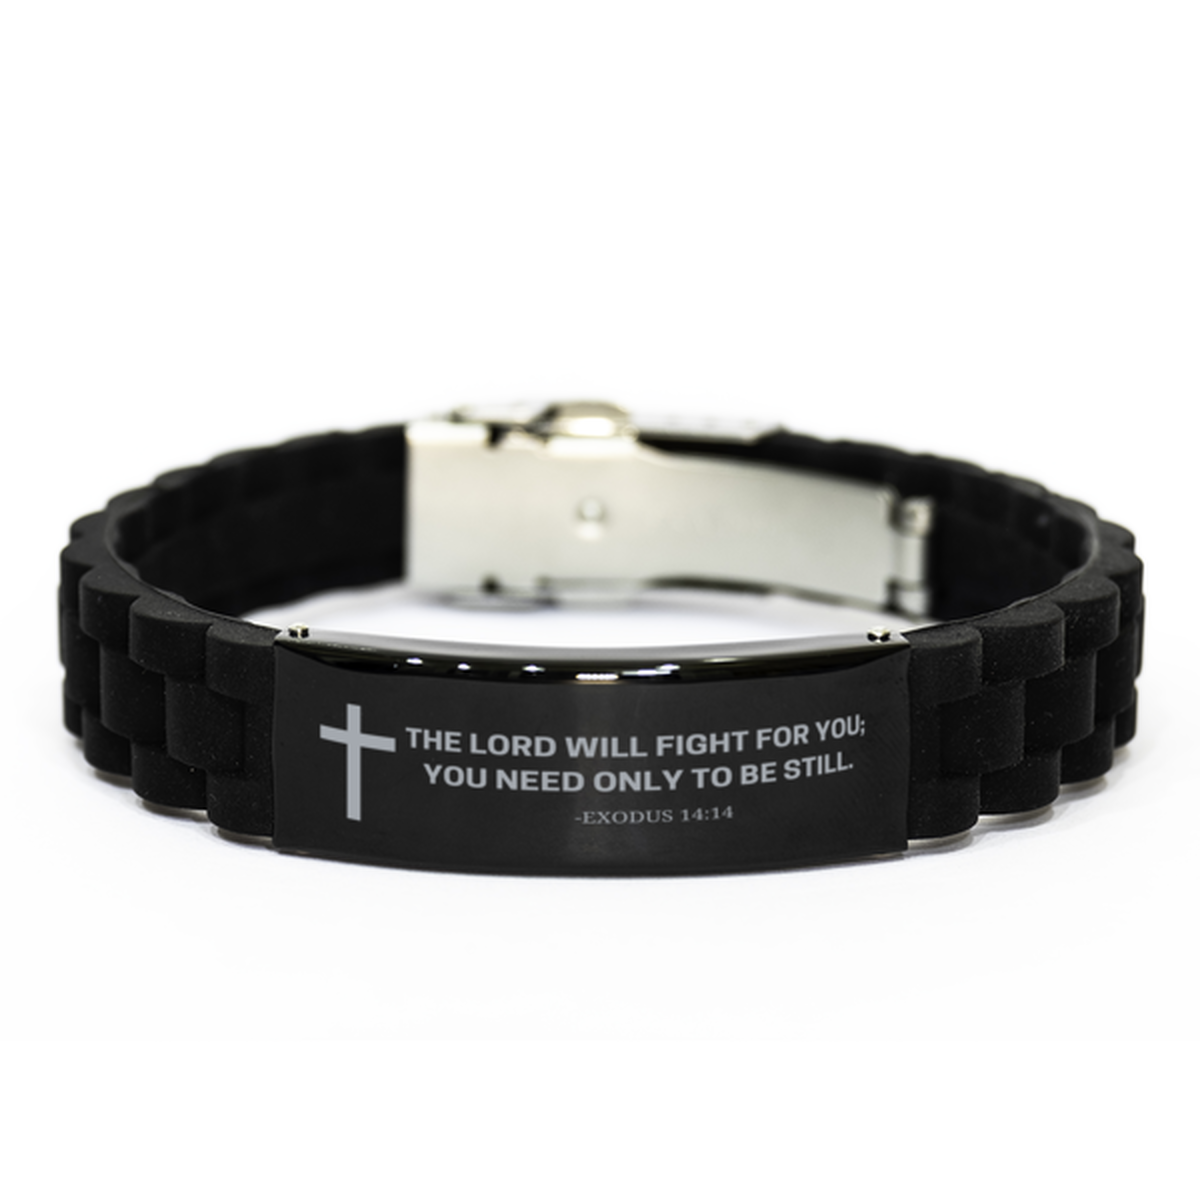 Baptism Gifts For Teenage Boys Girls, Christian Bible Verse Black Glidelock Clasp Bracelet, The Lord will fight for you, Catholic Confirmation Gifts for Son, Godson, Grandson, Nephew